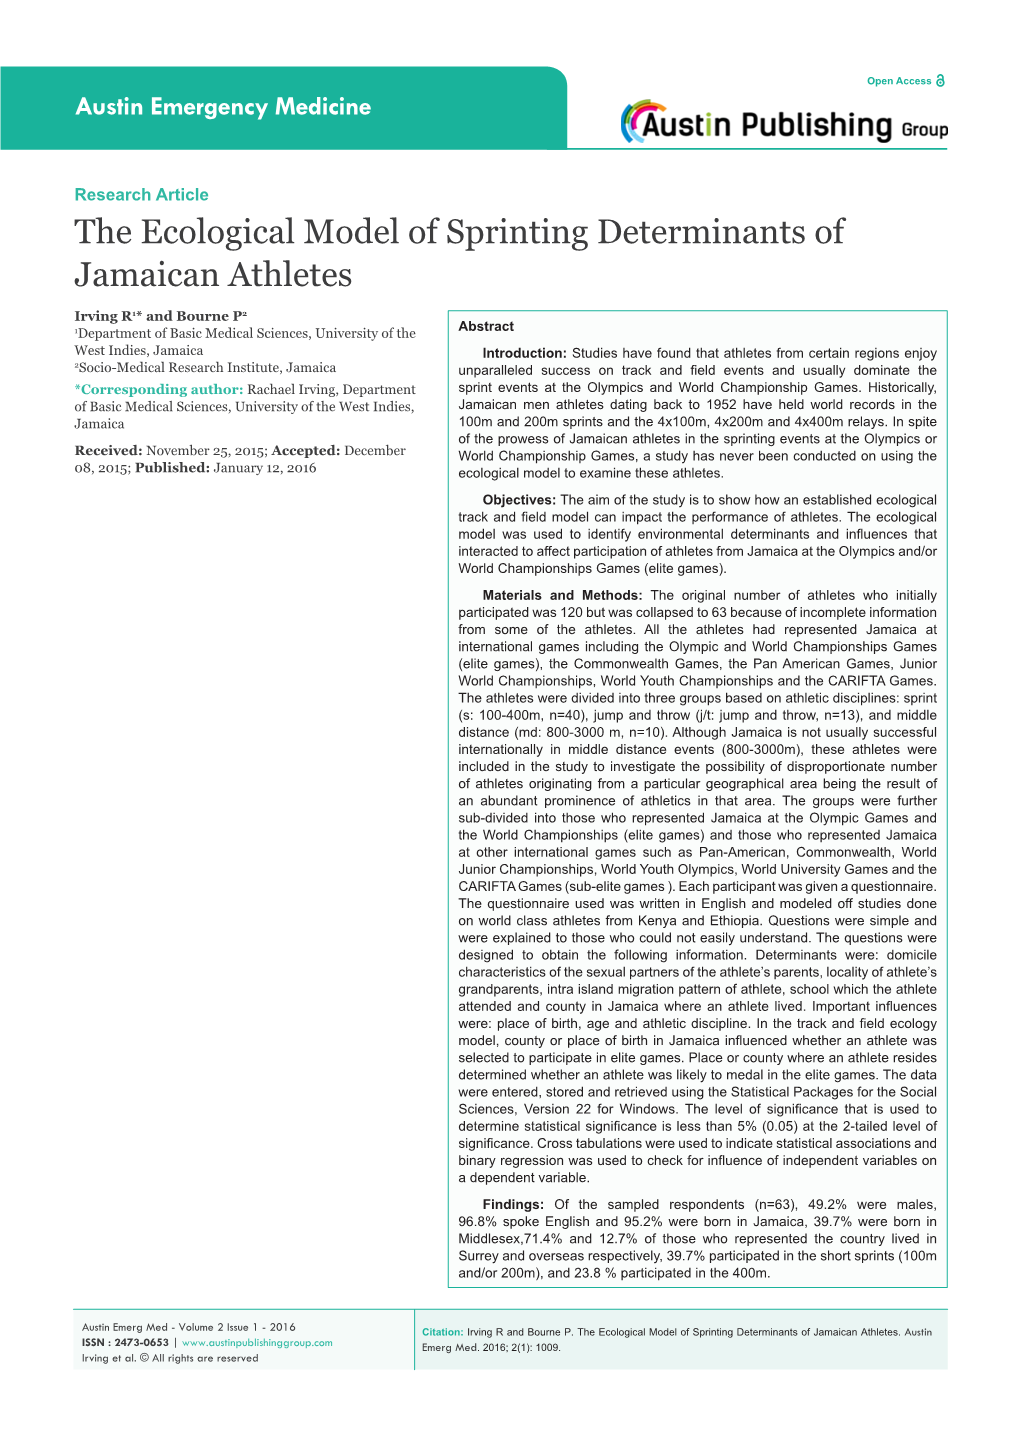 The Ecological Model of Sprinting Determinants of Jamaican Athletes